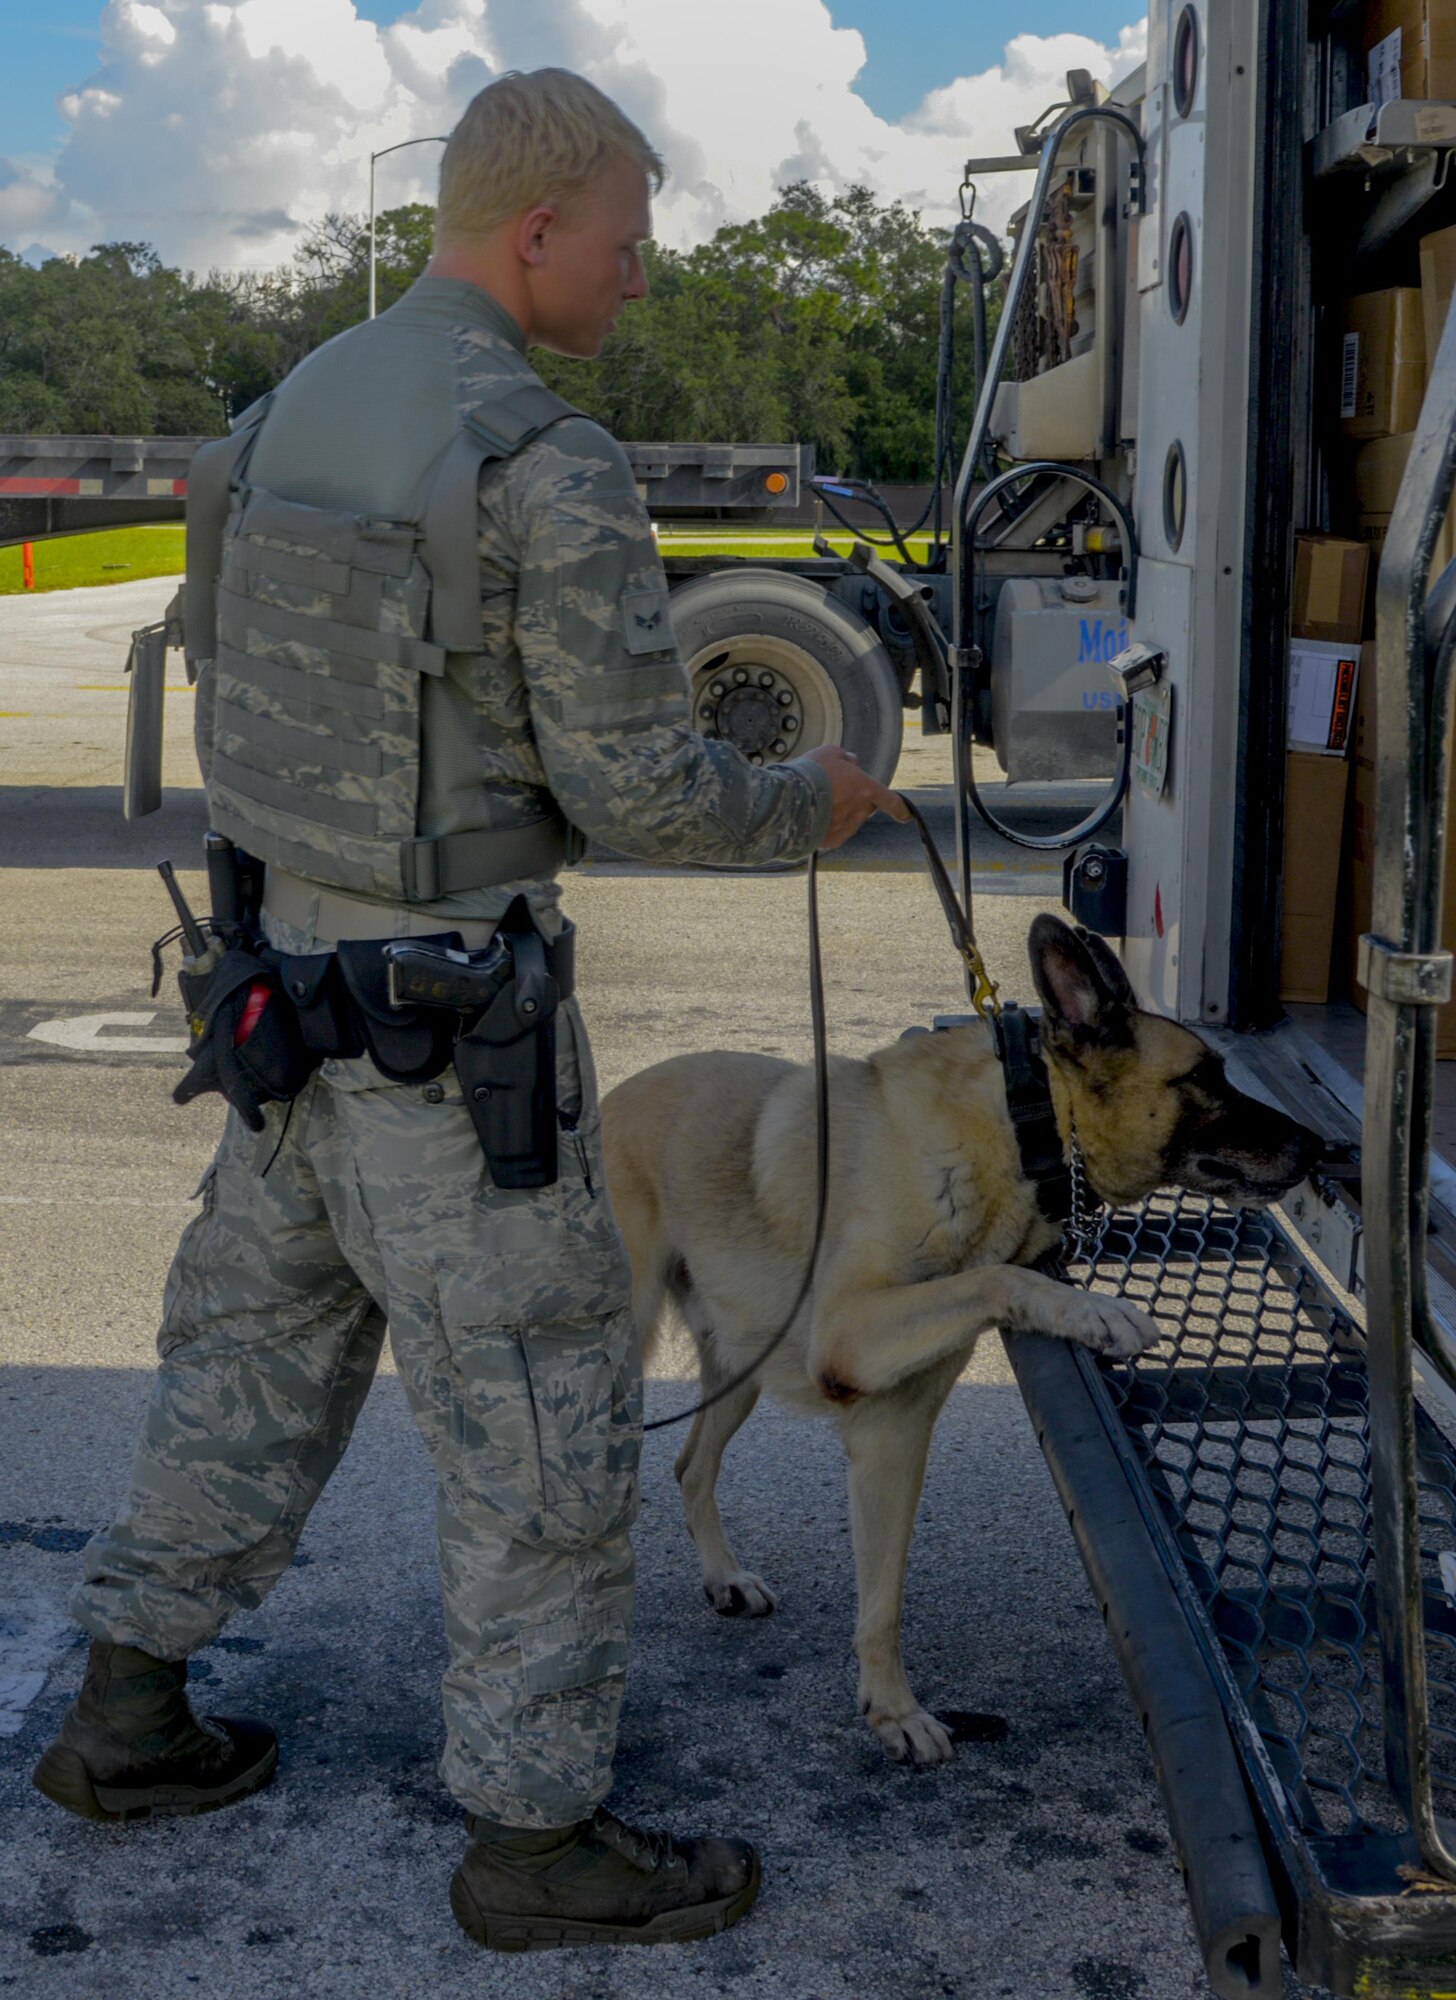 U.S. Air Force Senior Airman Brian Loughmiller, a military working dog handler assigned to the 6th Security Forces Squadron, searches vehicles with his partner Jecky, a military working dog, at MacDill Air Force Base, Fla., Aug. 15, 2017. Military working dogs are trained to detect explosives or drugs. (U.S. Air Force photo by Senior Airman Mariette Adams)